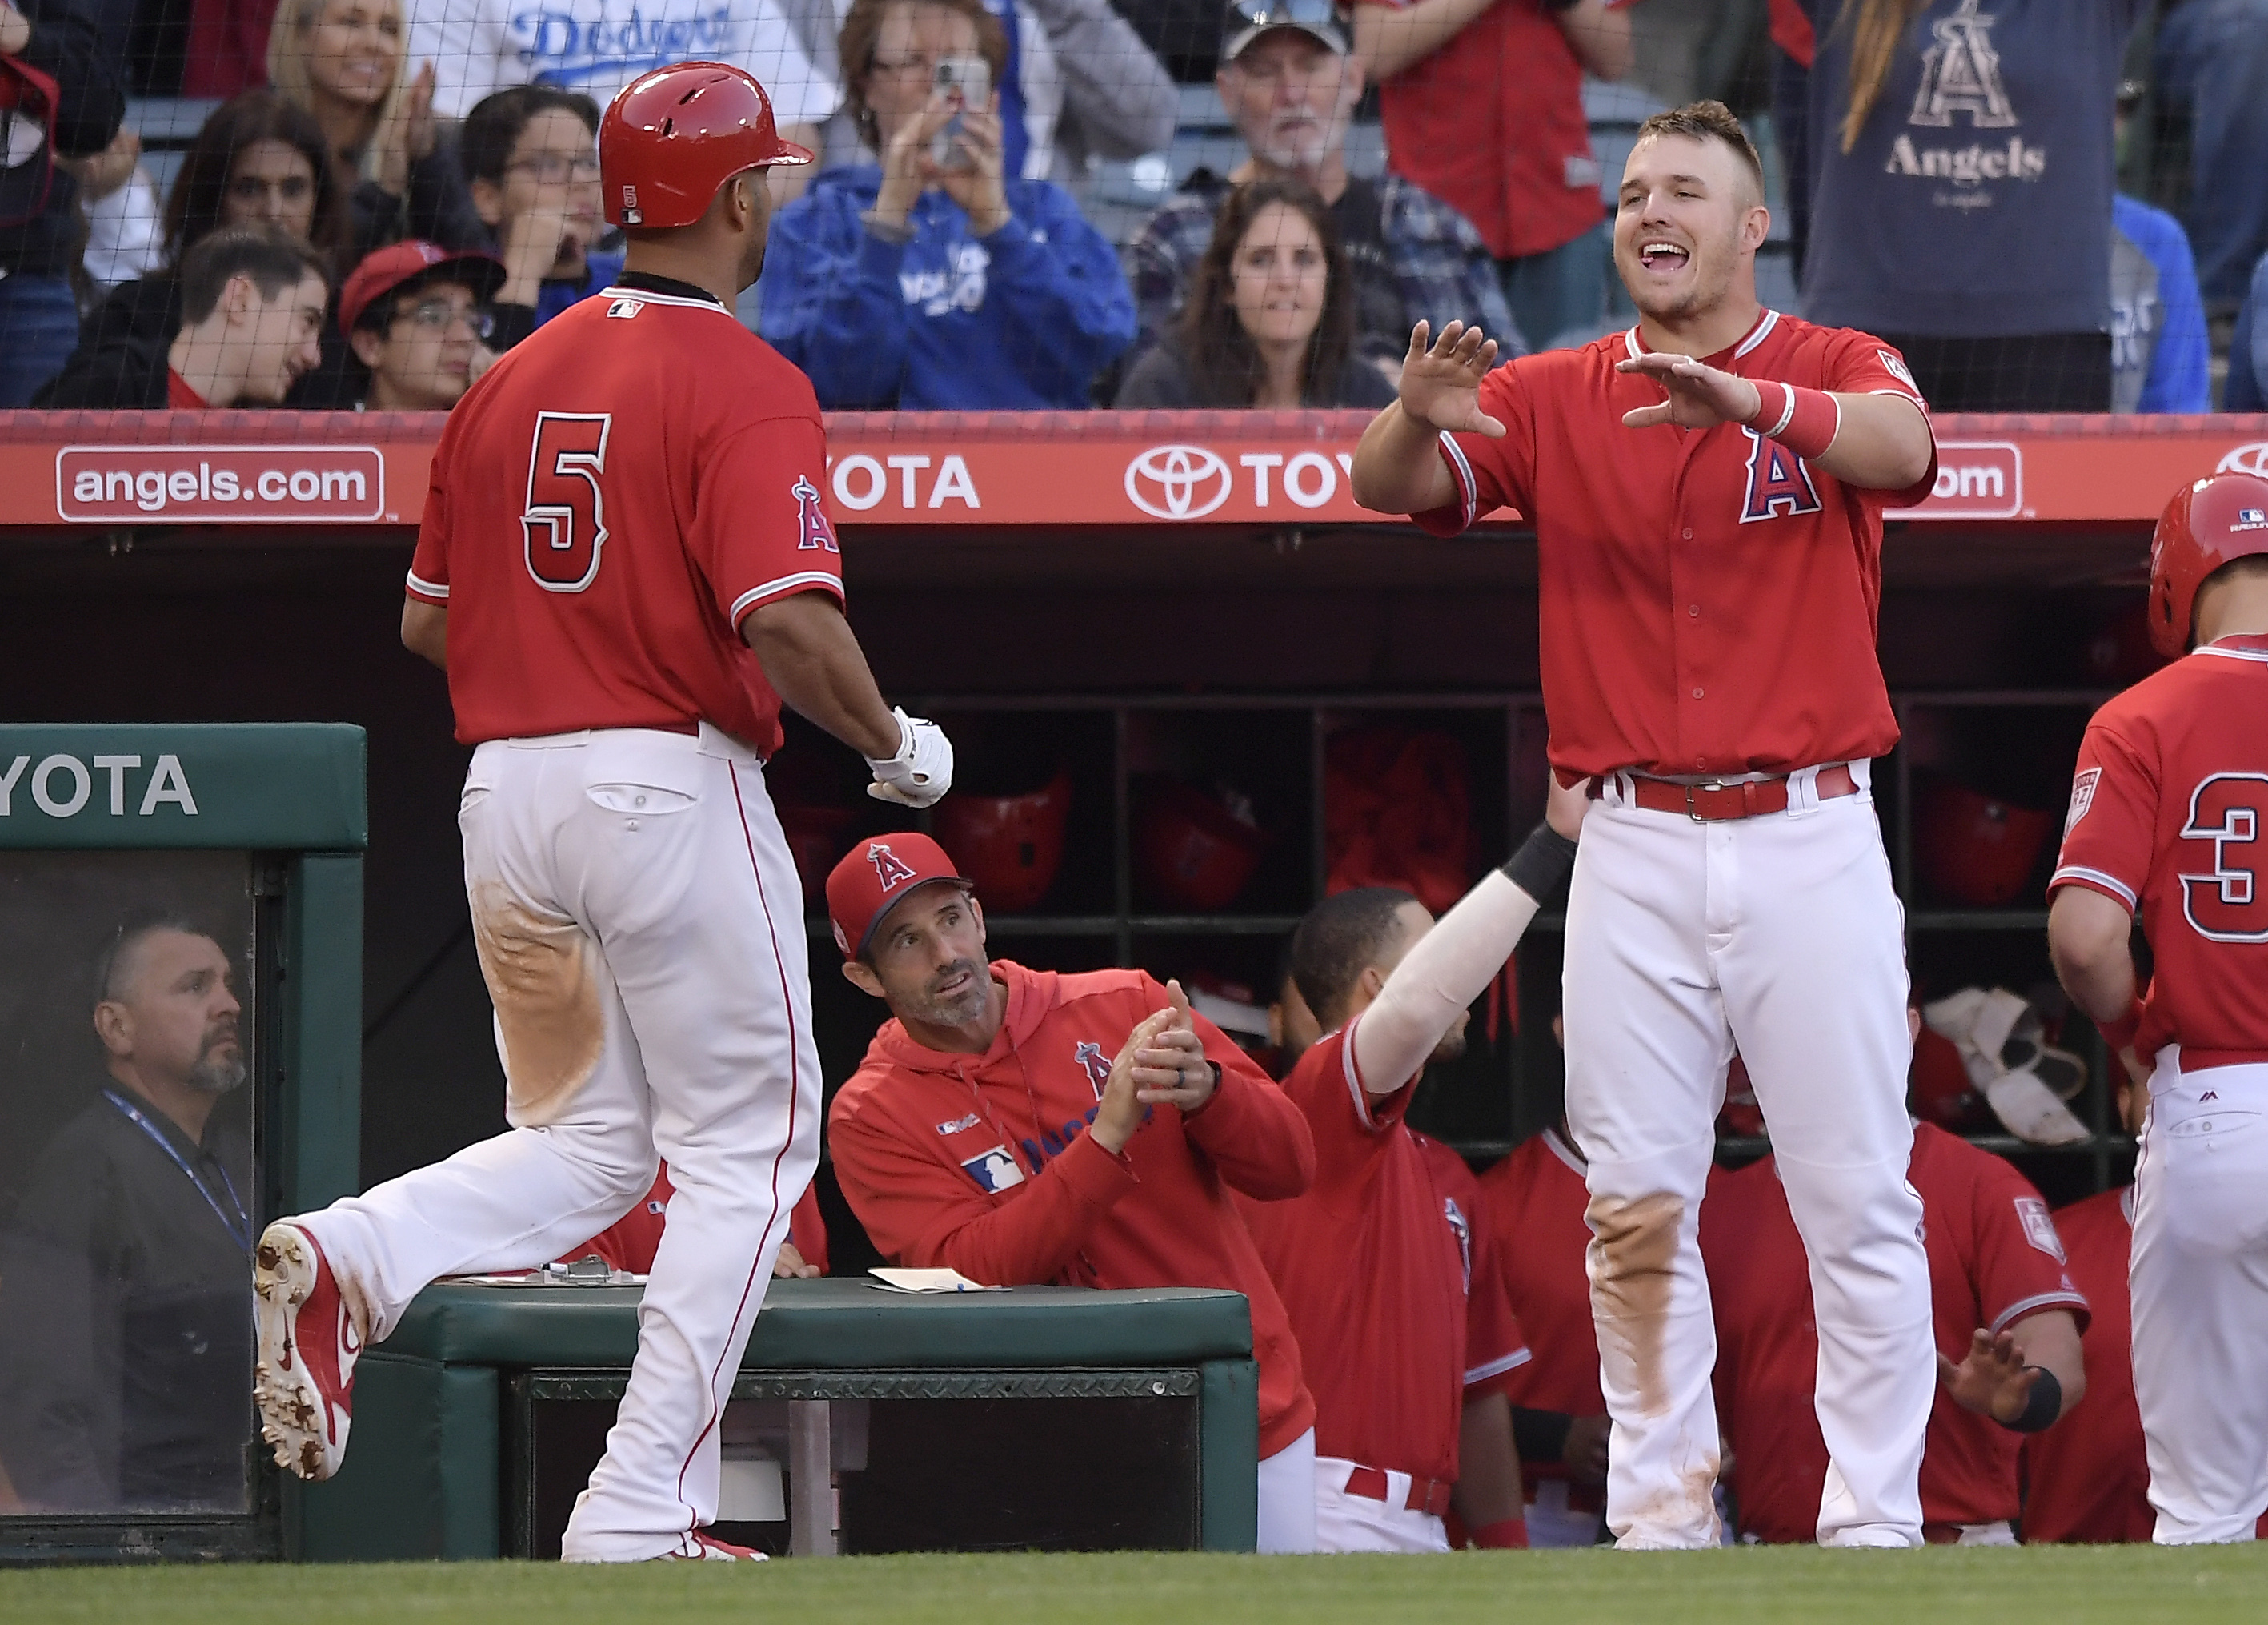 Trout, Pujols deliver for Angels in 8-4 win over Dodgers